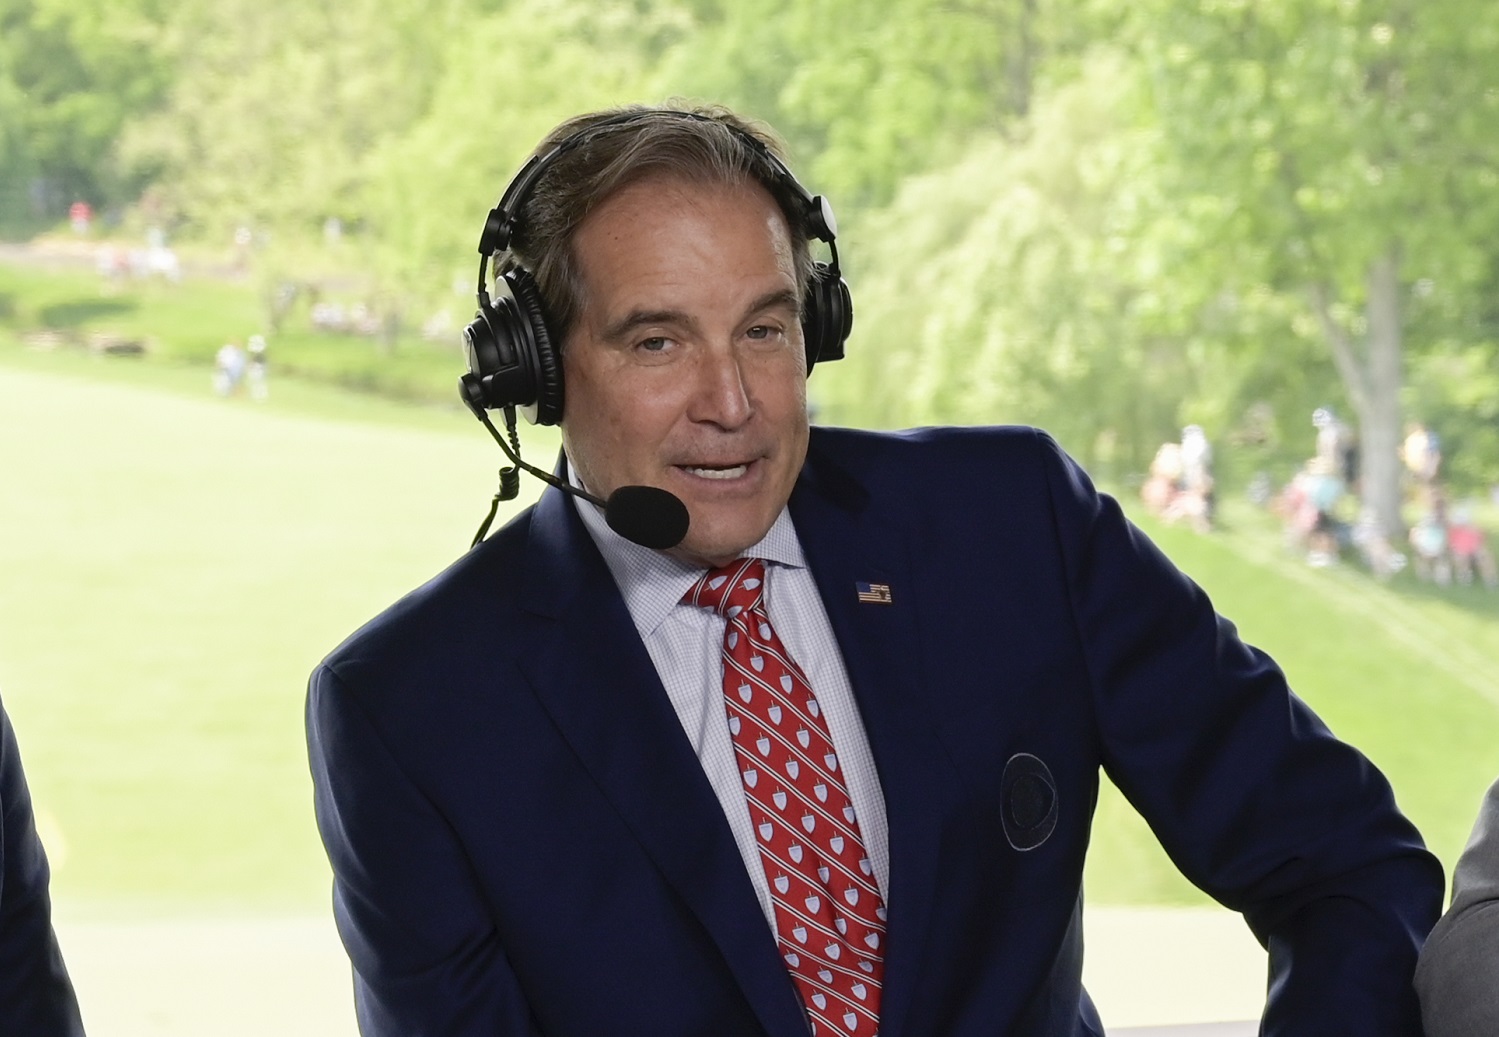 Jim Nantz, who teams with Tony Romo on NFL telecasts, has worked for CBS since 1985.